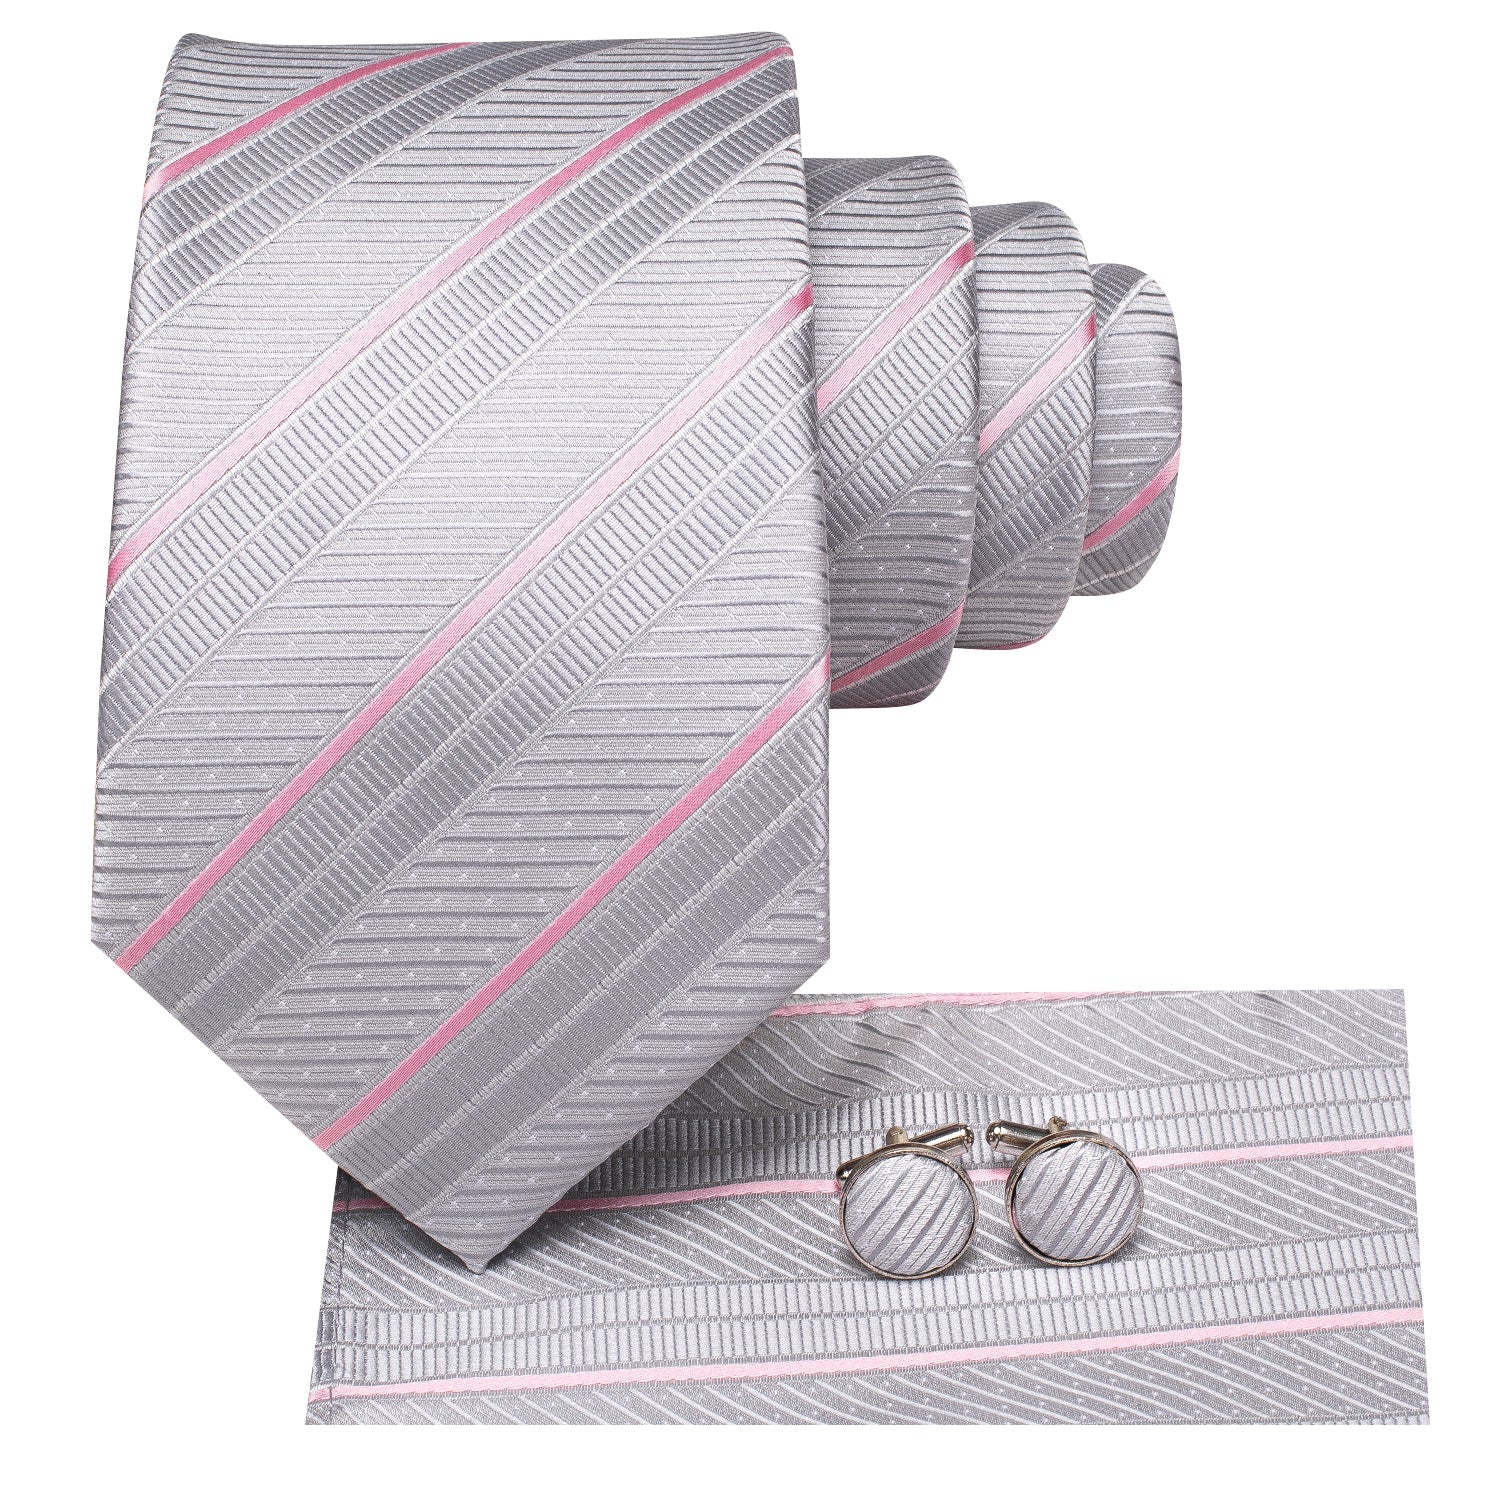 New Silver Pink Strip 70 Inches Extra Long Tie Pocket Square Cufflinks Set